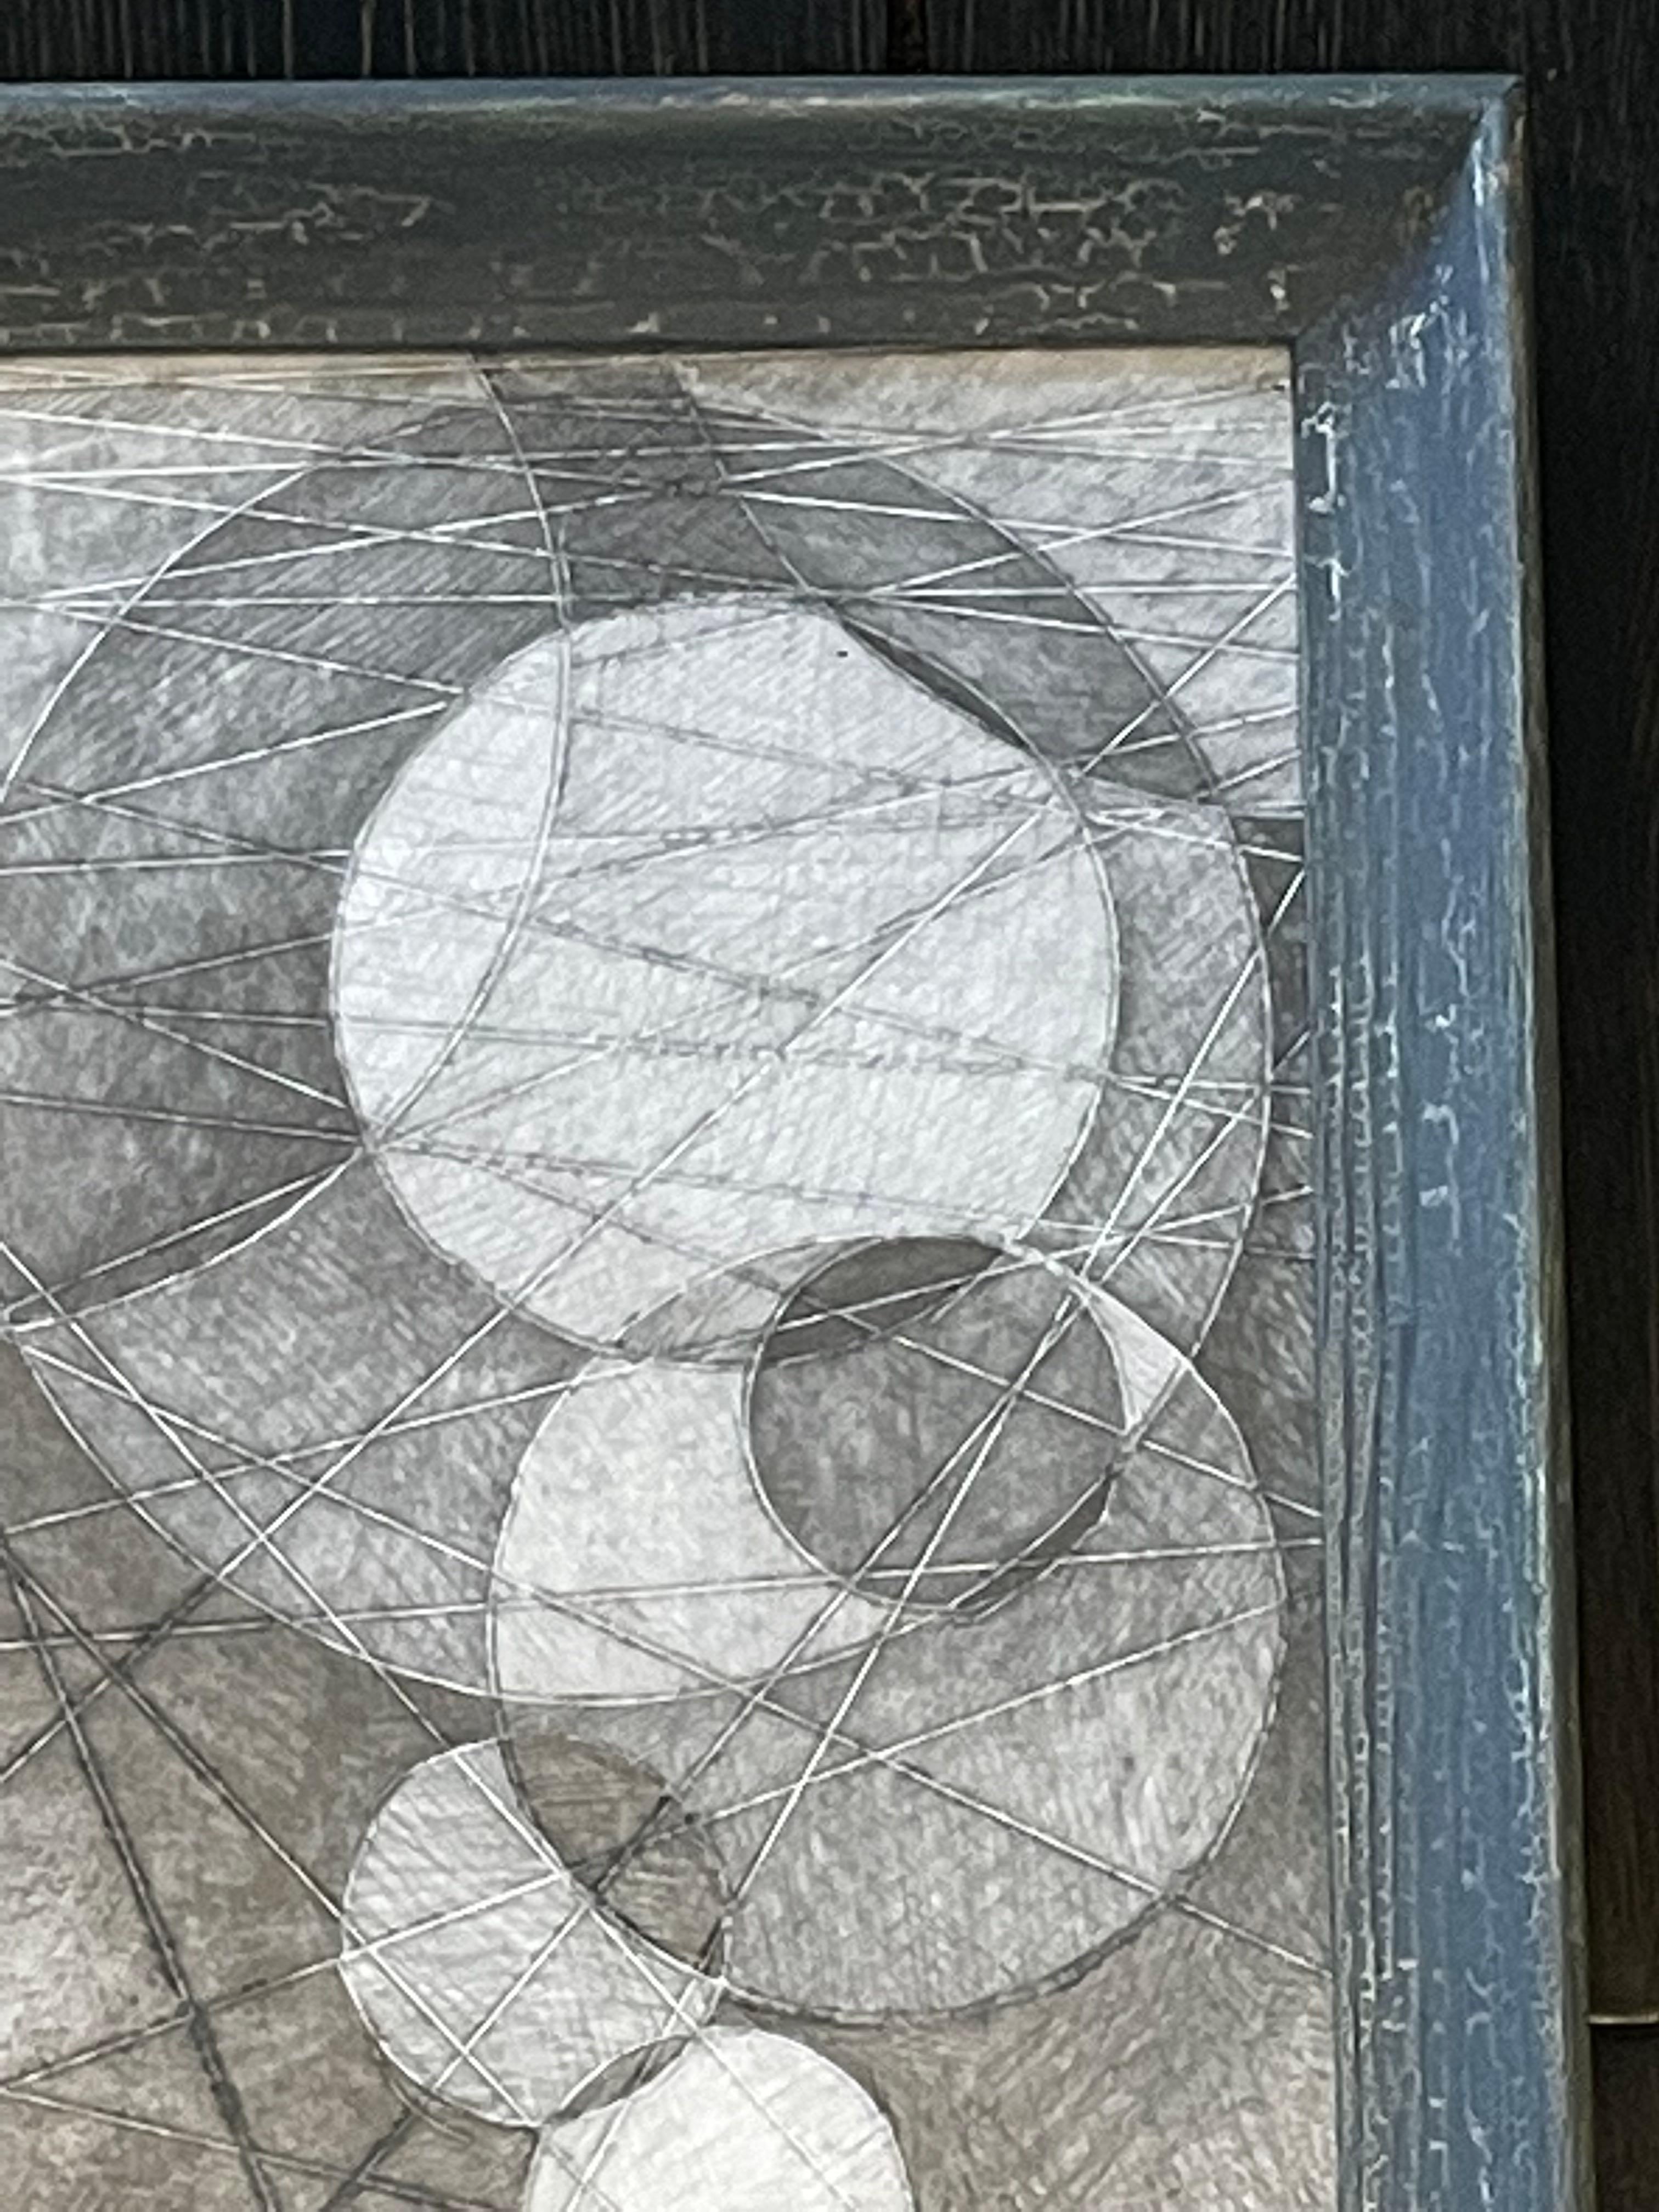 Contemporary original graphite drawing by American artist David Dew Bruner.
Multi circle design graphite on paper.
The artist was Inspired by the artist Graham Sutherland.
This is one of many pieces from a large body of works.
The drawing is in